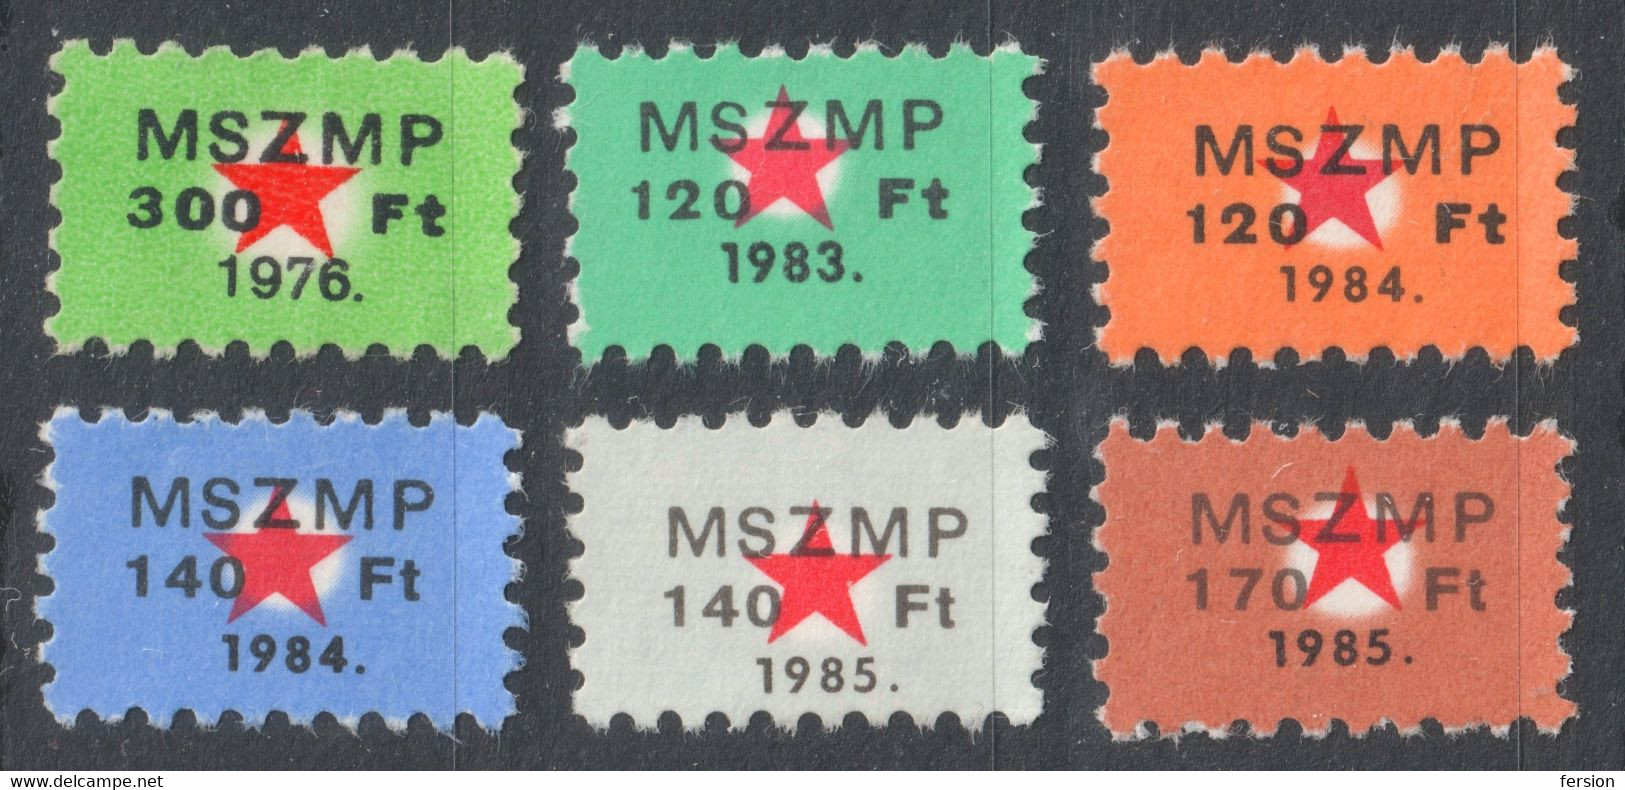 Communist Communism RED STAR Membership Stamp Hungarian Socialist Workers Party MSZMP Red Star HUNGARY Used LOT - Dienstmarken